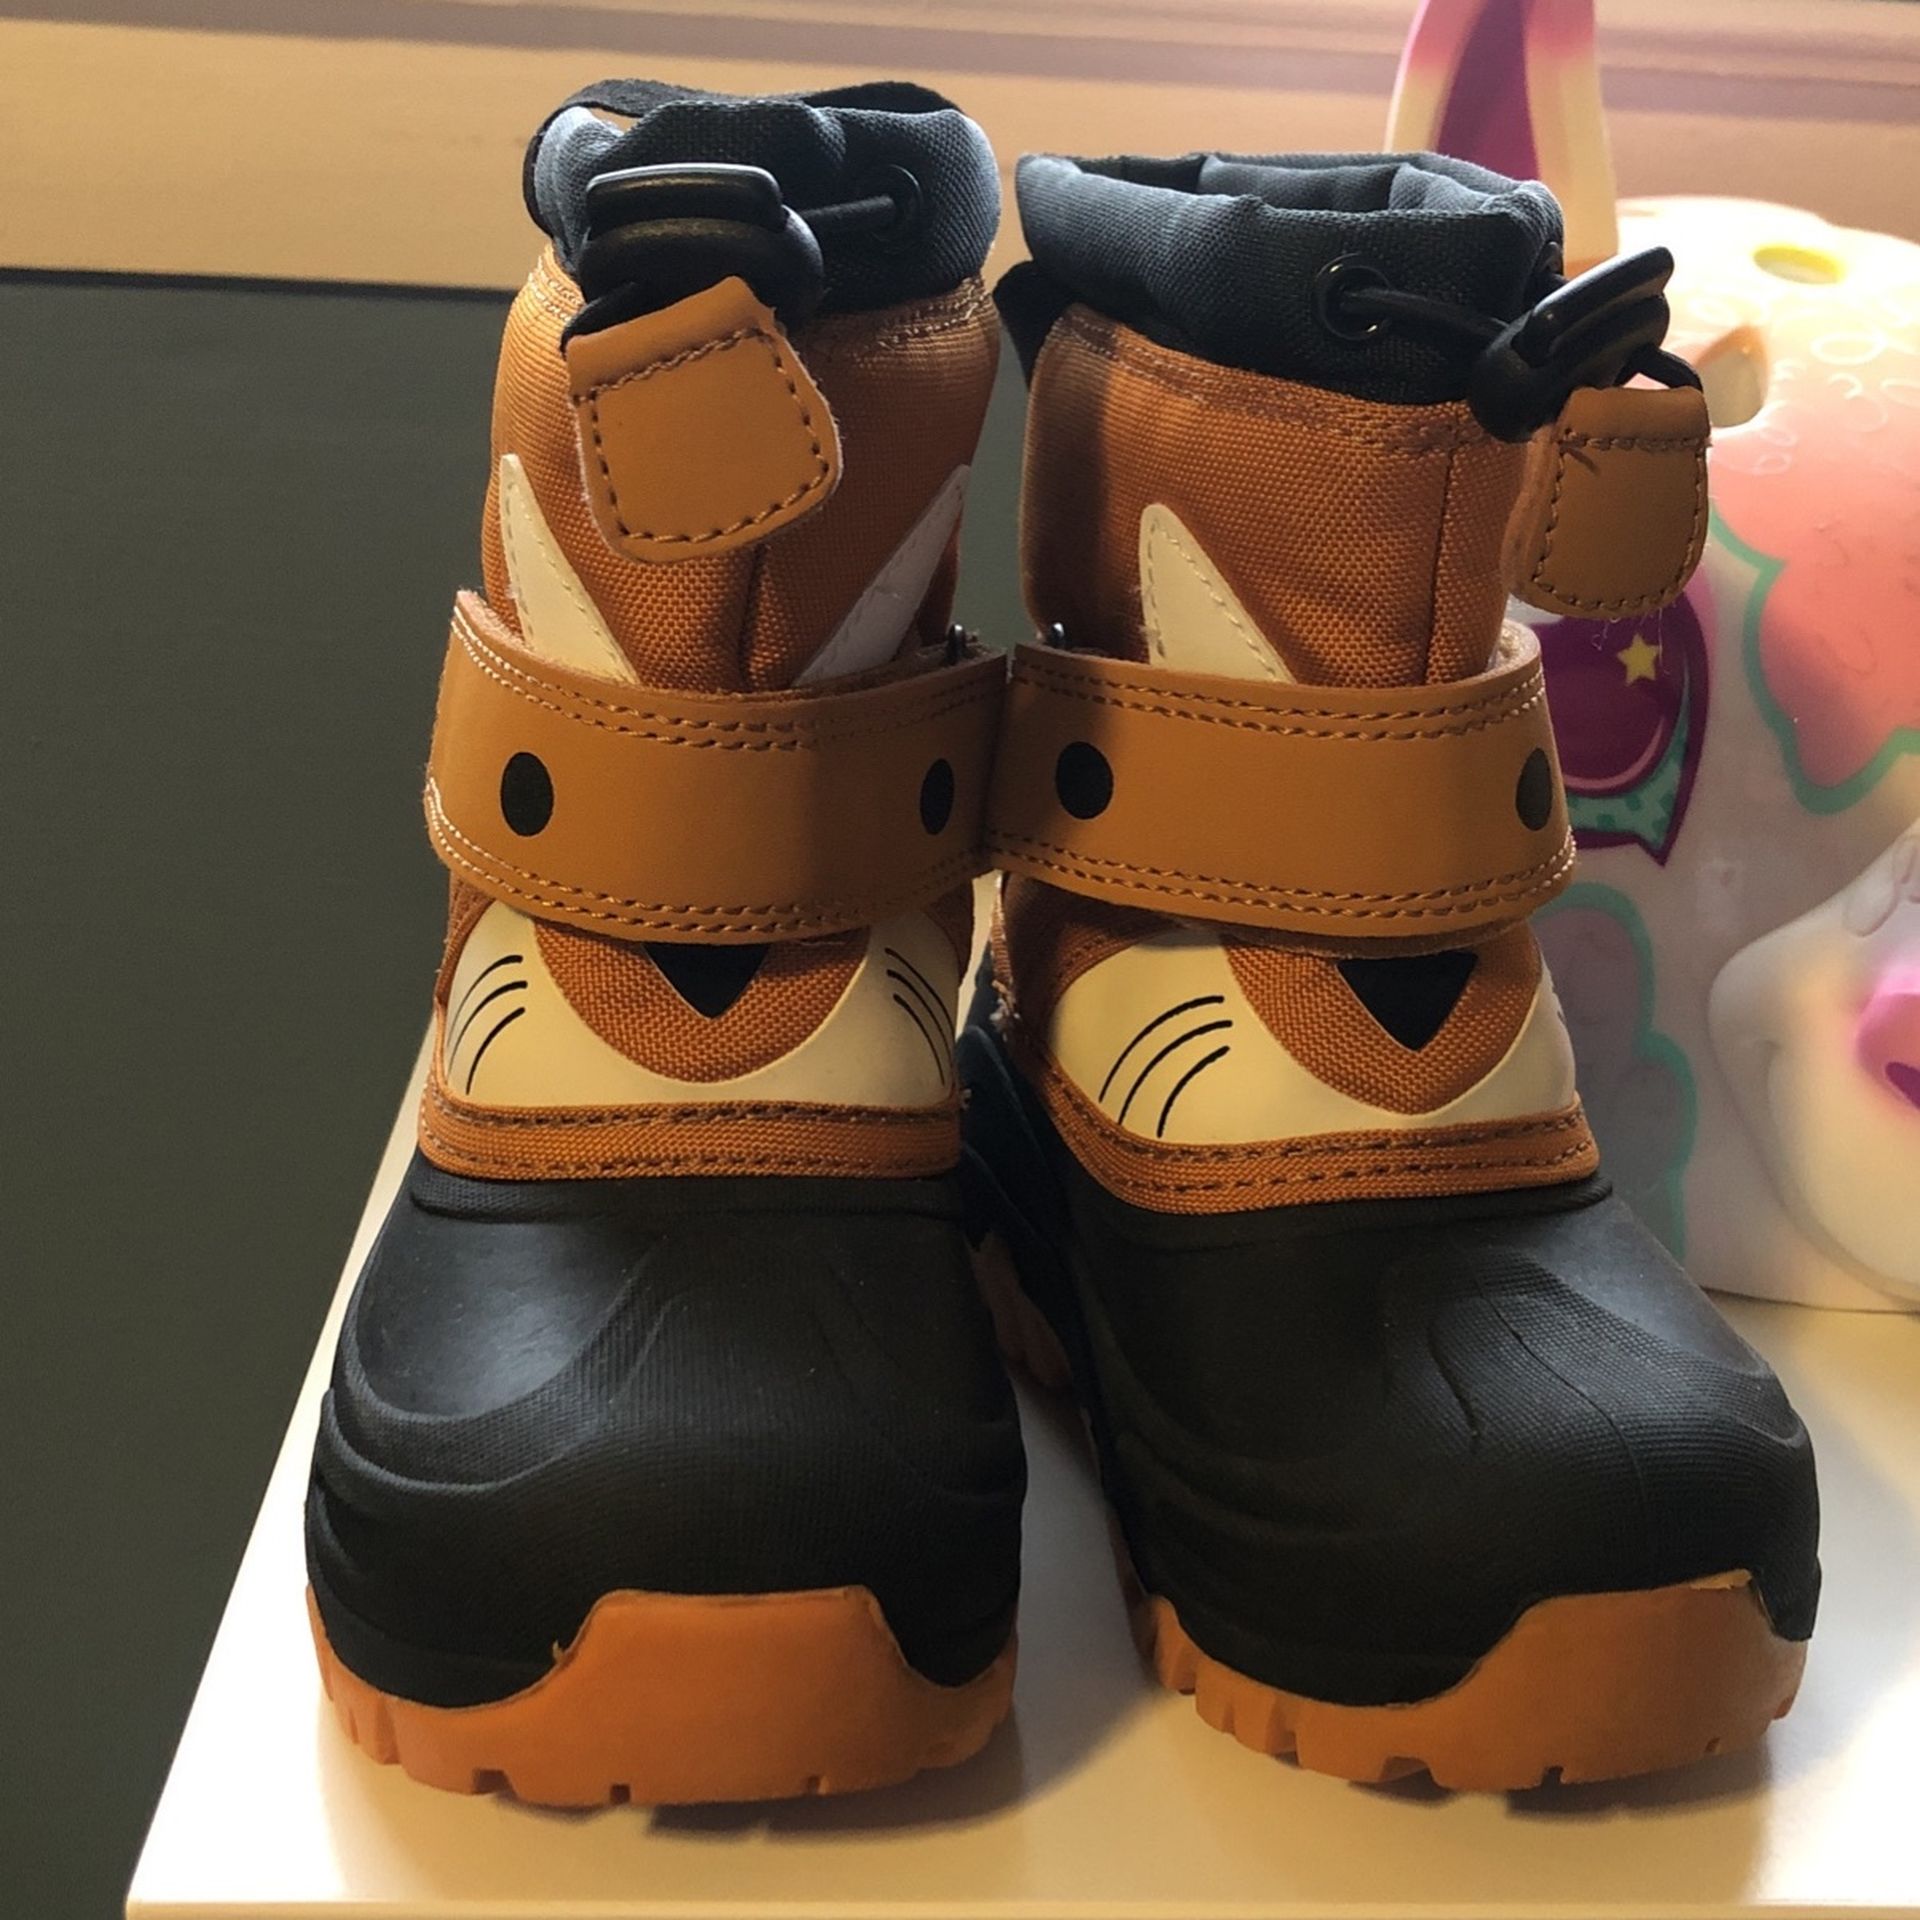 Size 7 Toddler Snow Boots From Target New